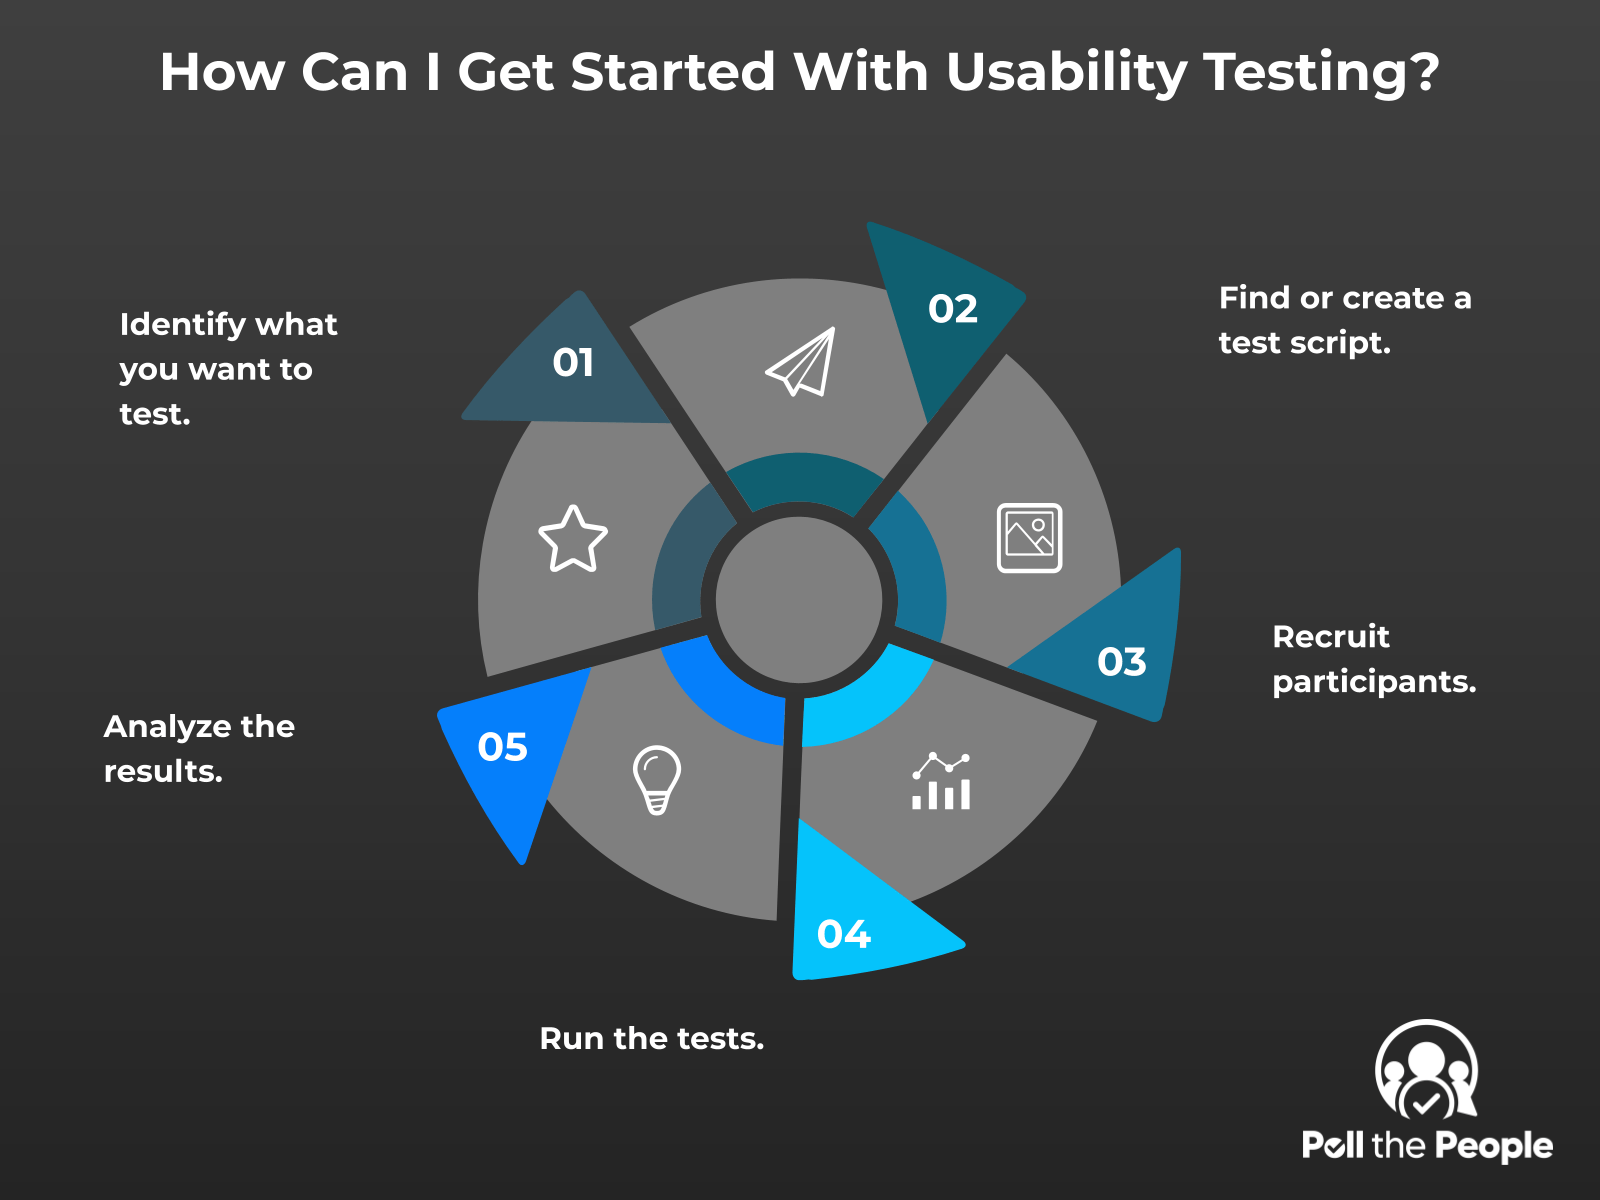 INFOGRAPHIC: How can I get started with usability testing? - Poll the People